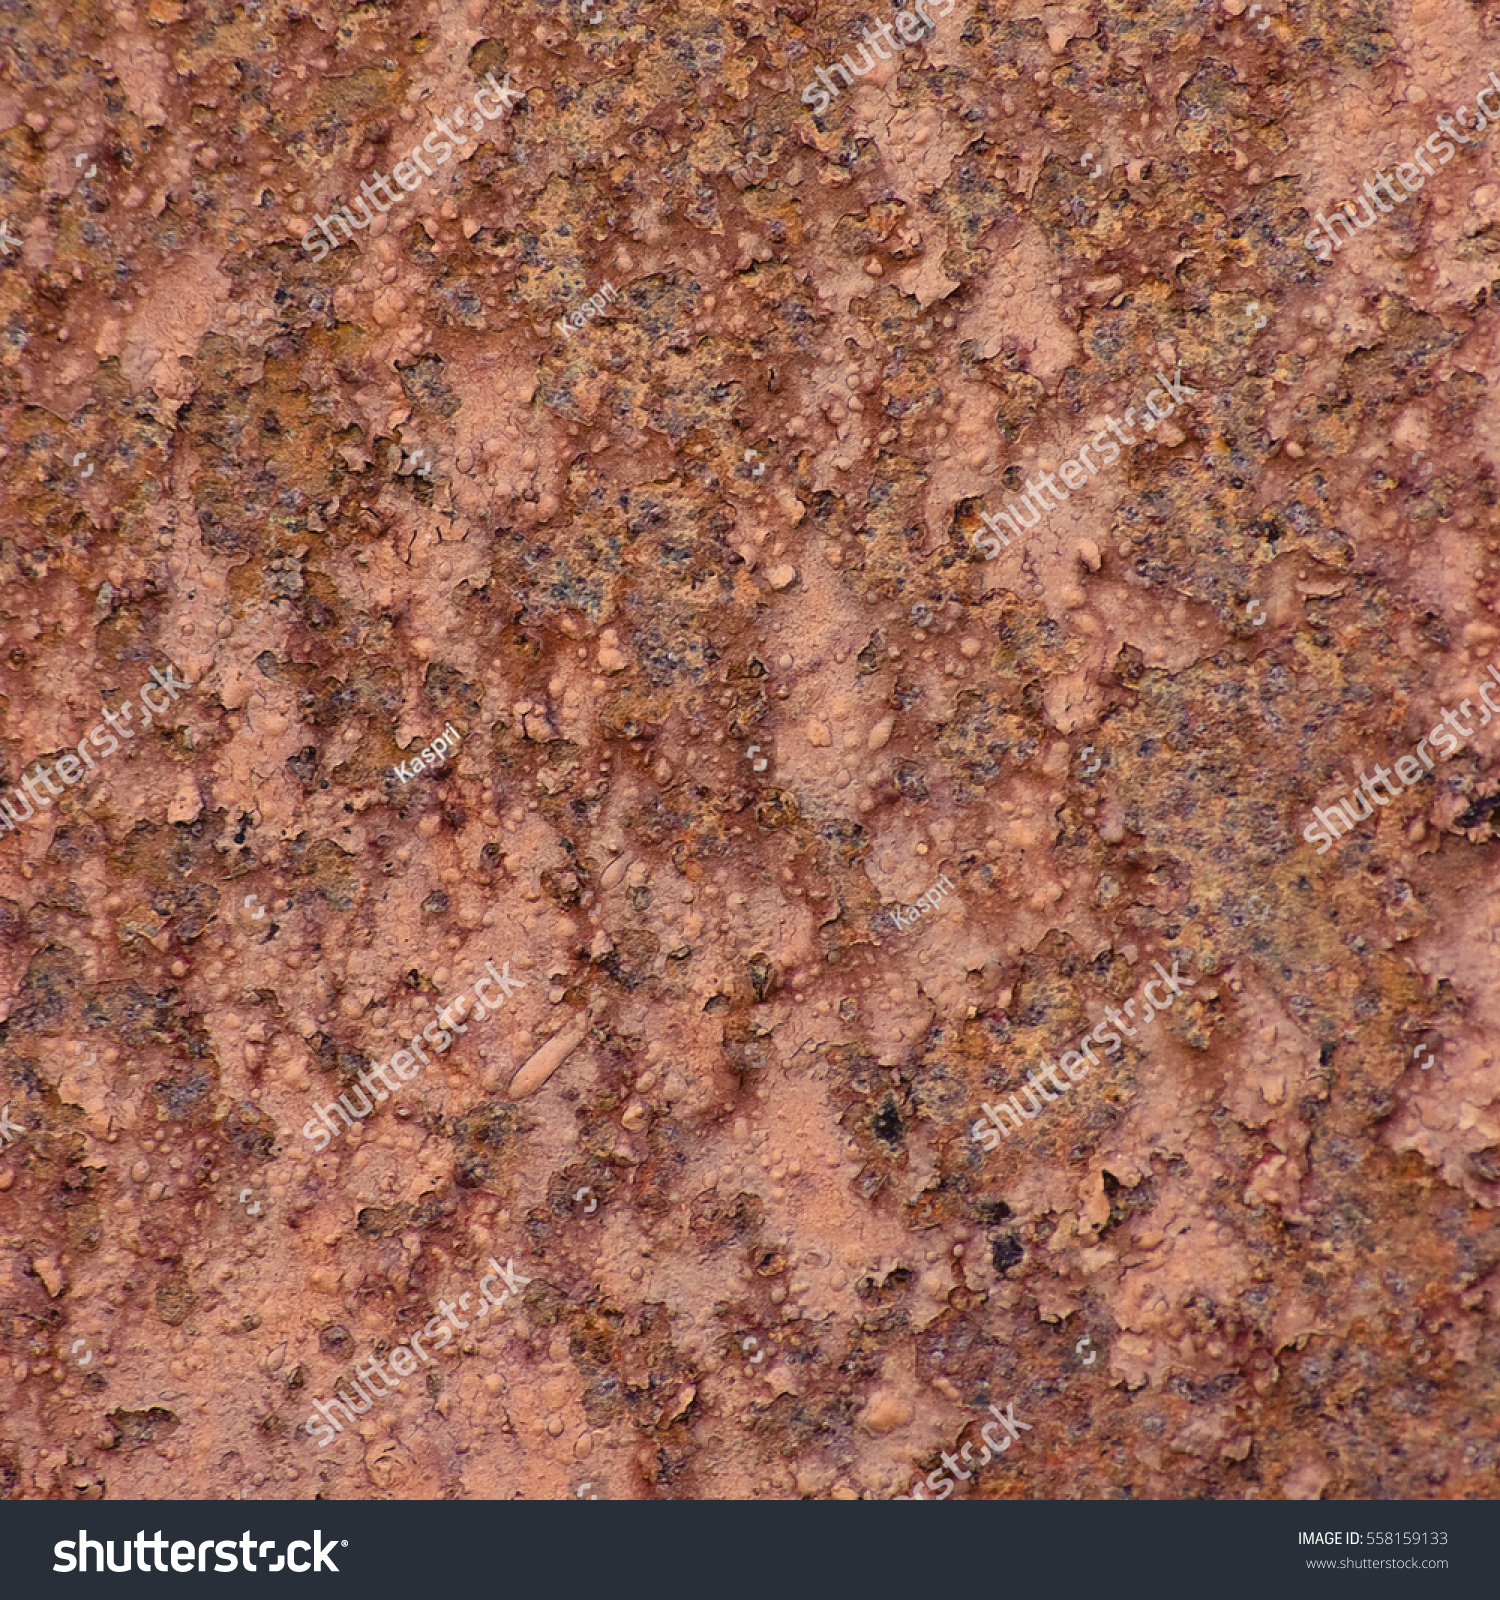 Rust Metal Surface Texture Old Weathered Stock Photo (100% Legal ...